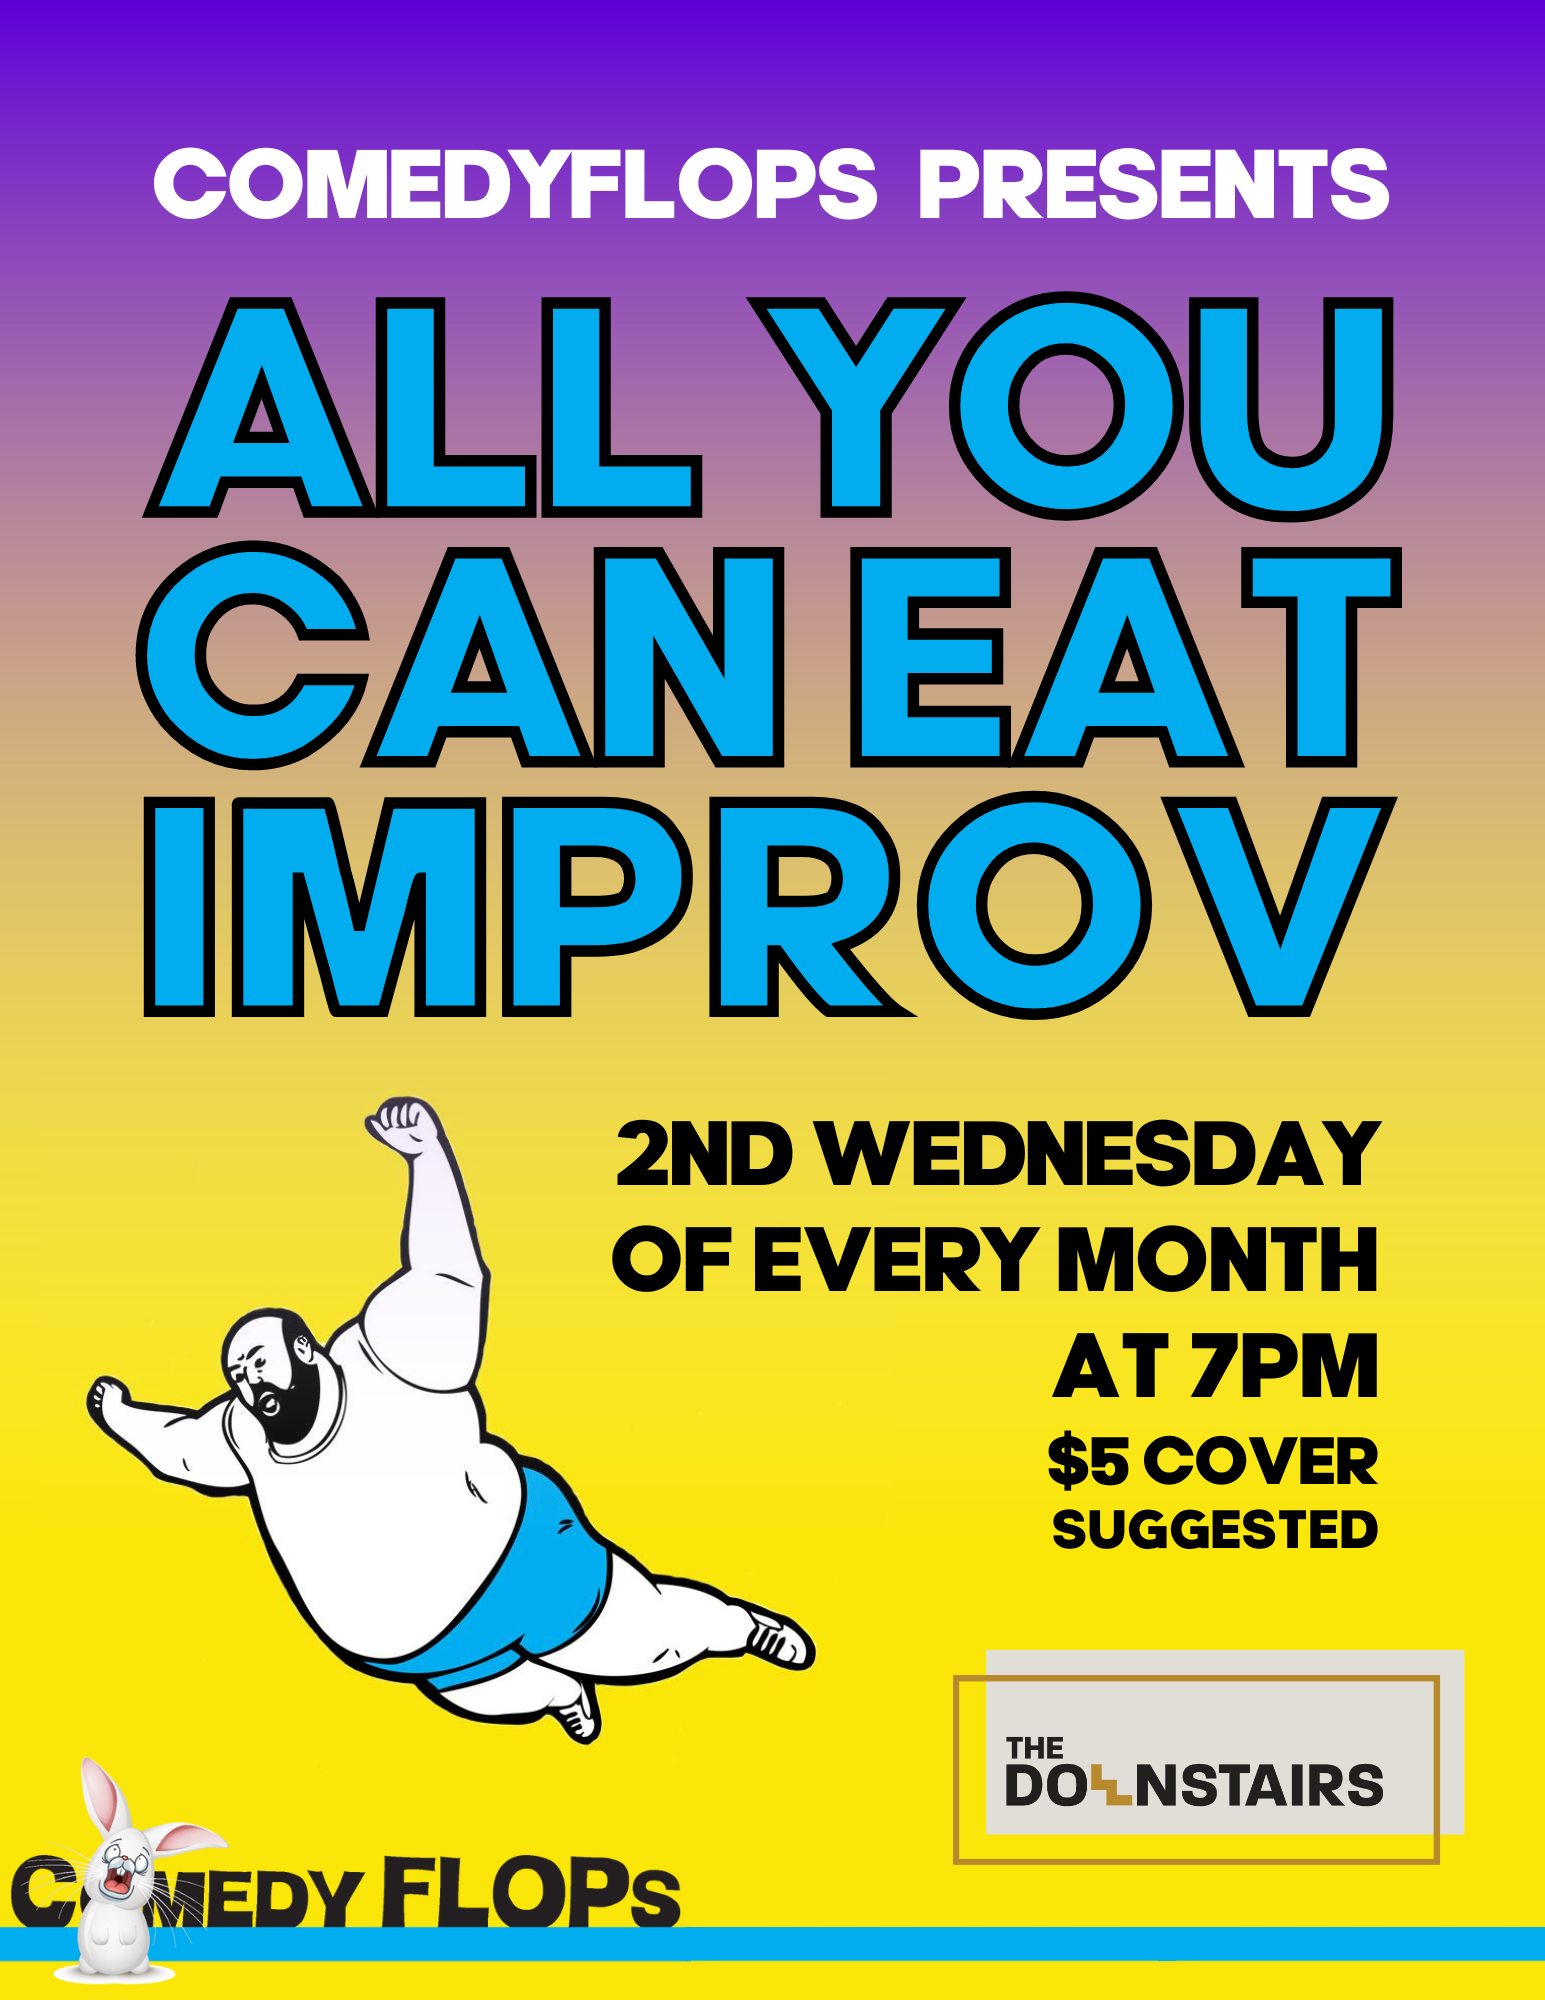 All You Can Eat Improv with Comedy FLOPS benefiting the Friends of the Ithaca Youth Bureau